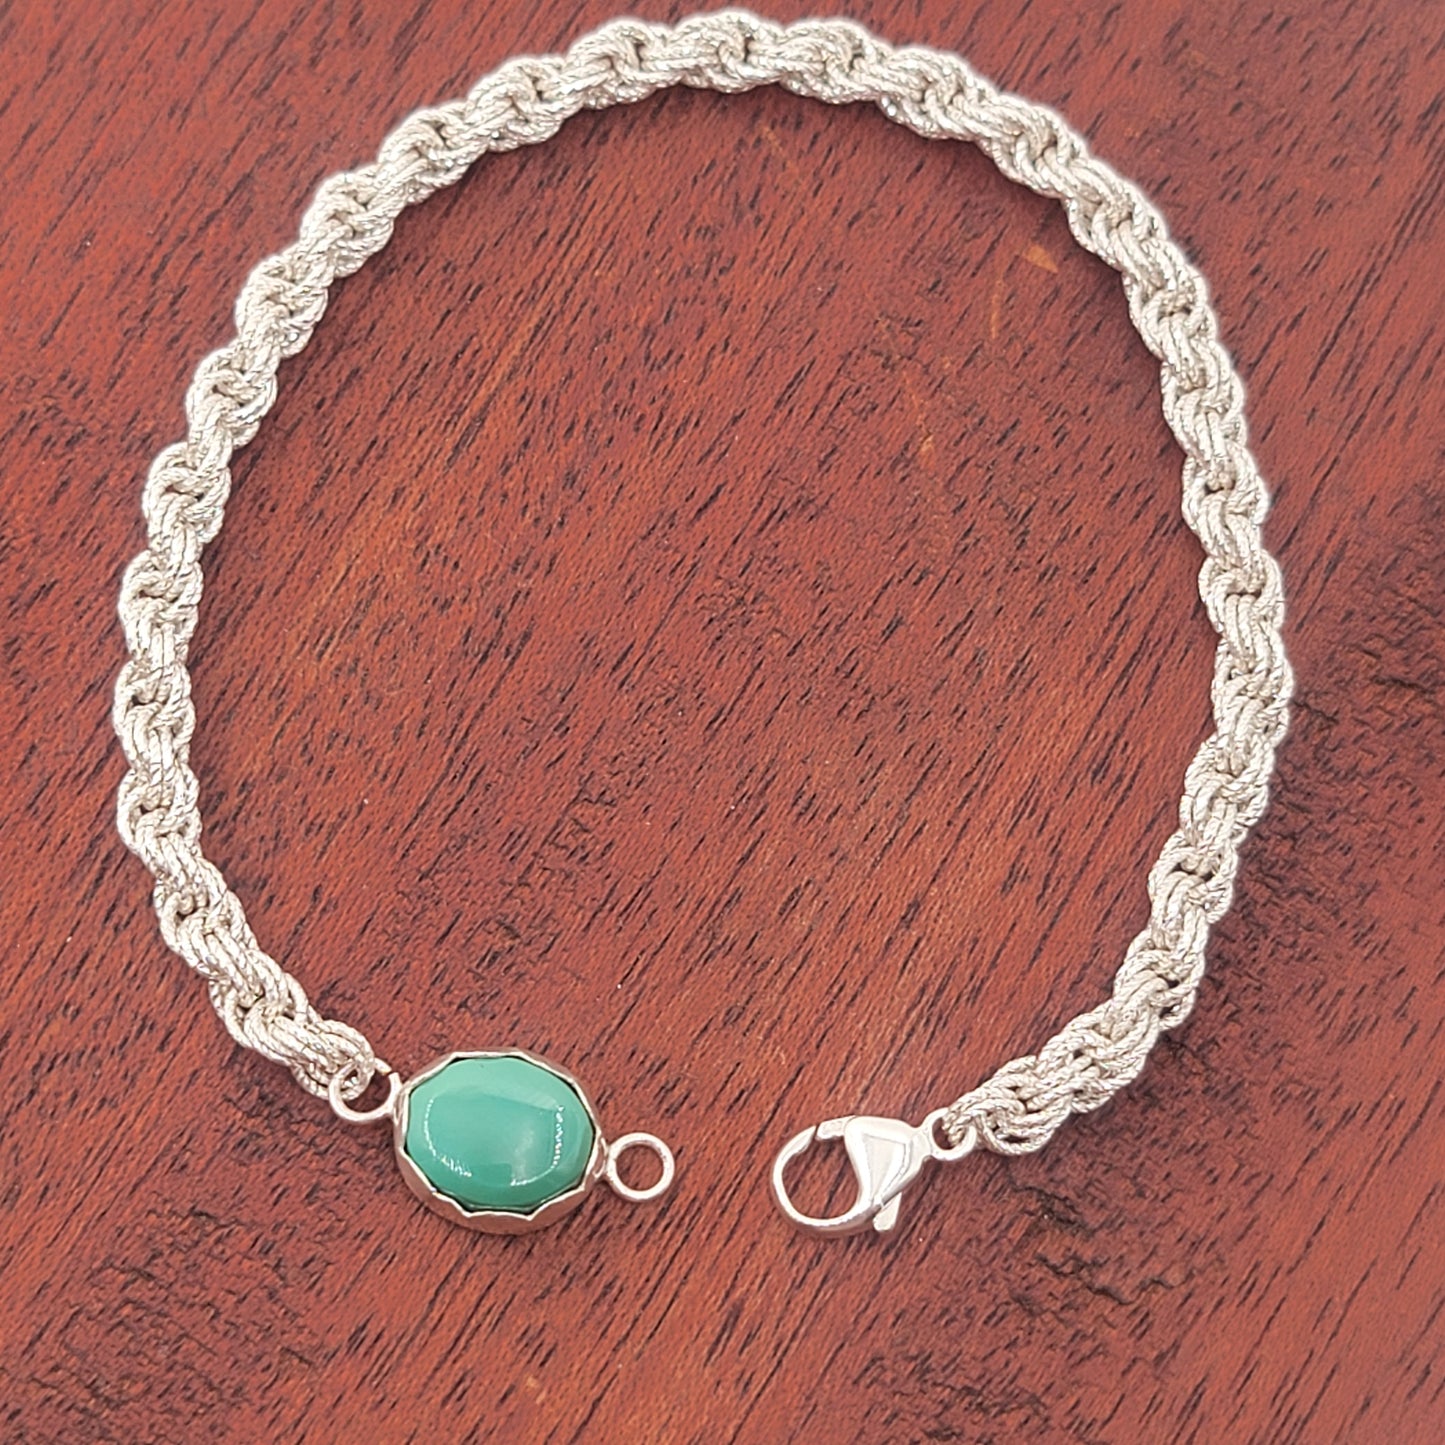 Small Silver Sparkle Chain Bracelet with Turquoise